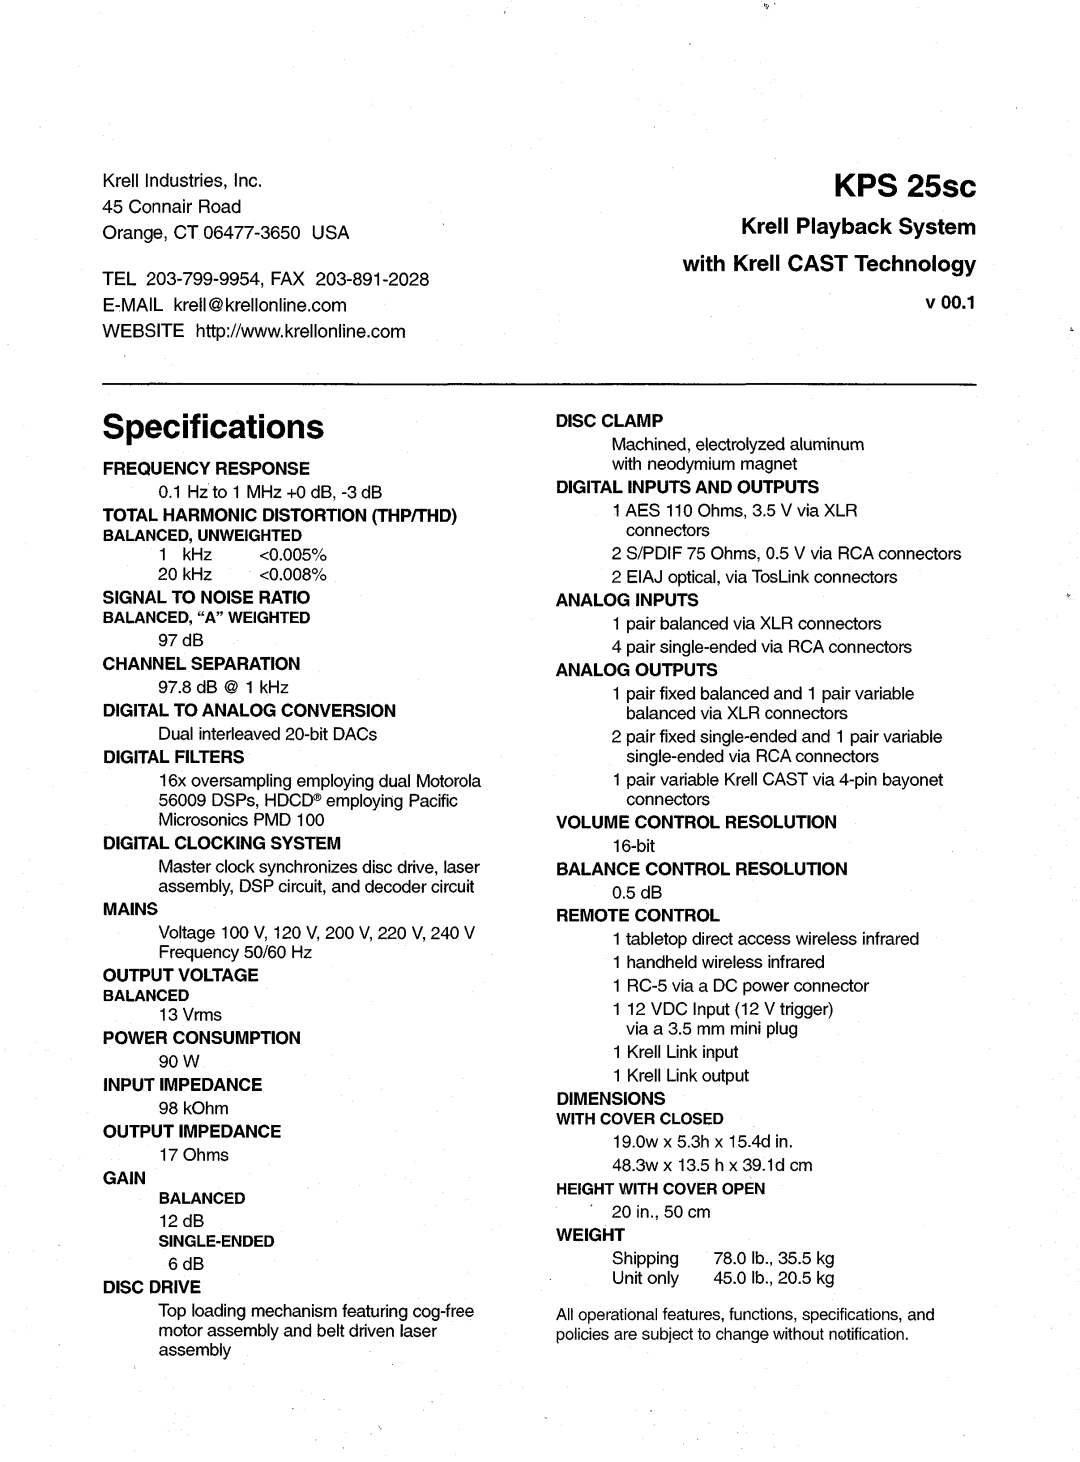 Krell Industries KPS 25sc manual Specifications, Krell PlaybackSystem with Krell CASTTechnology, KPS25sc, Frequencyresponse 